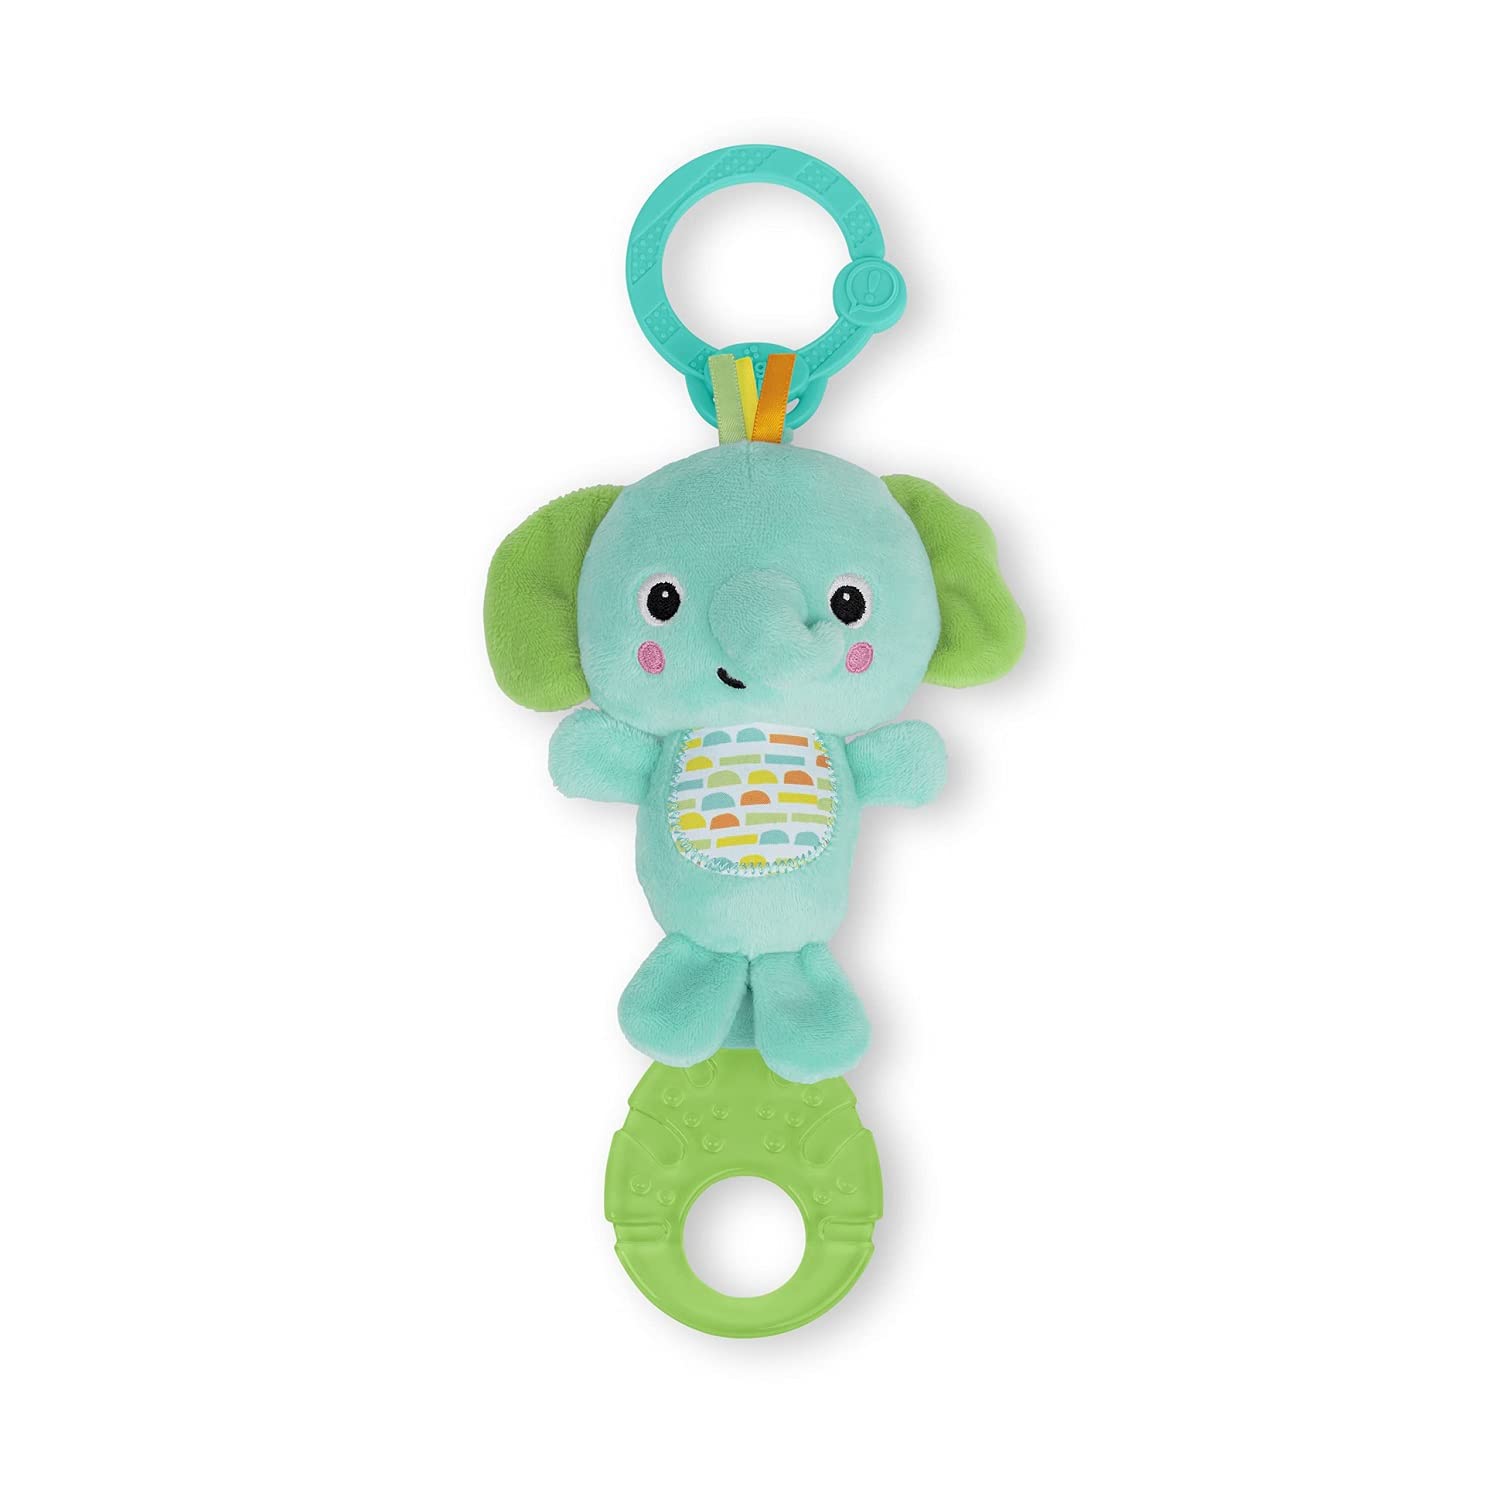 Bright Starts Tug Tunes On-The-Go Toy for Stroller and Carriers - Elephant - Unisex, Newborn +